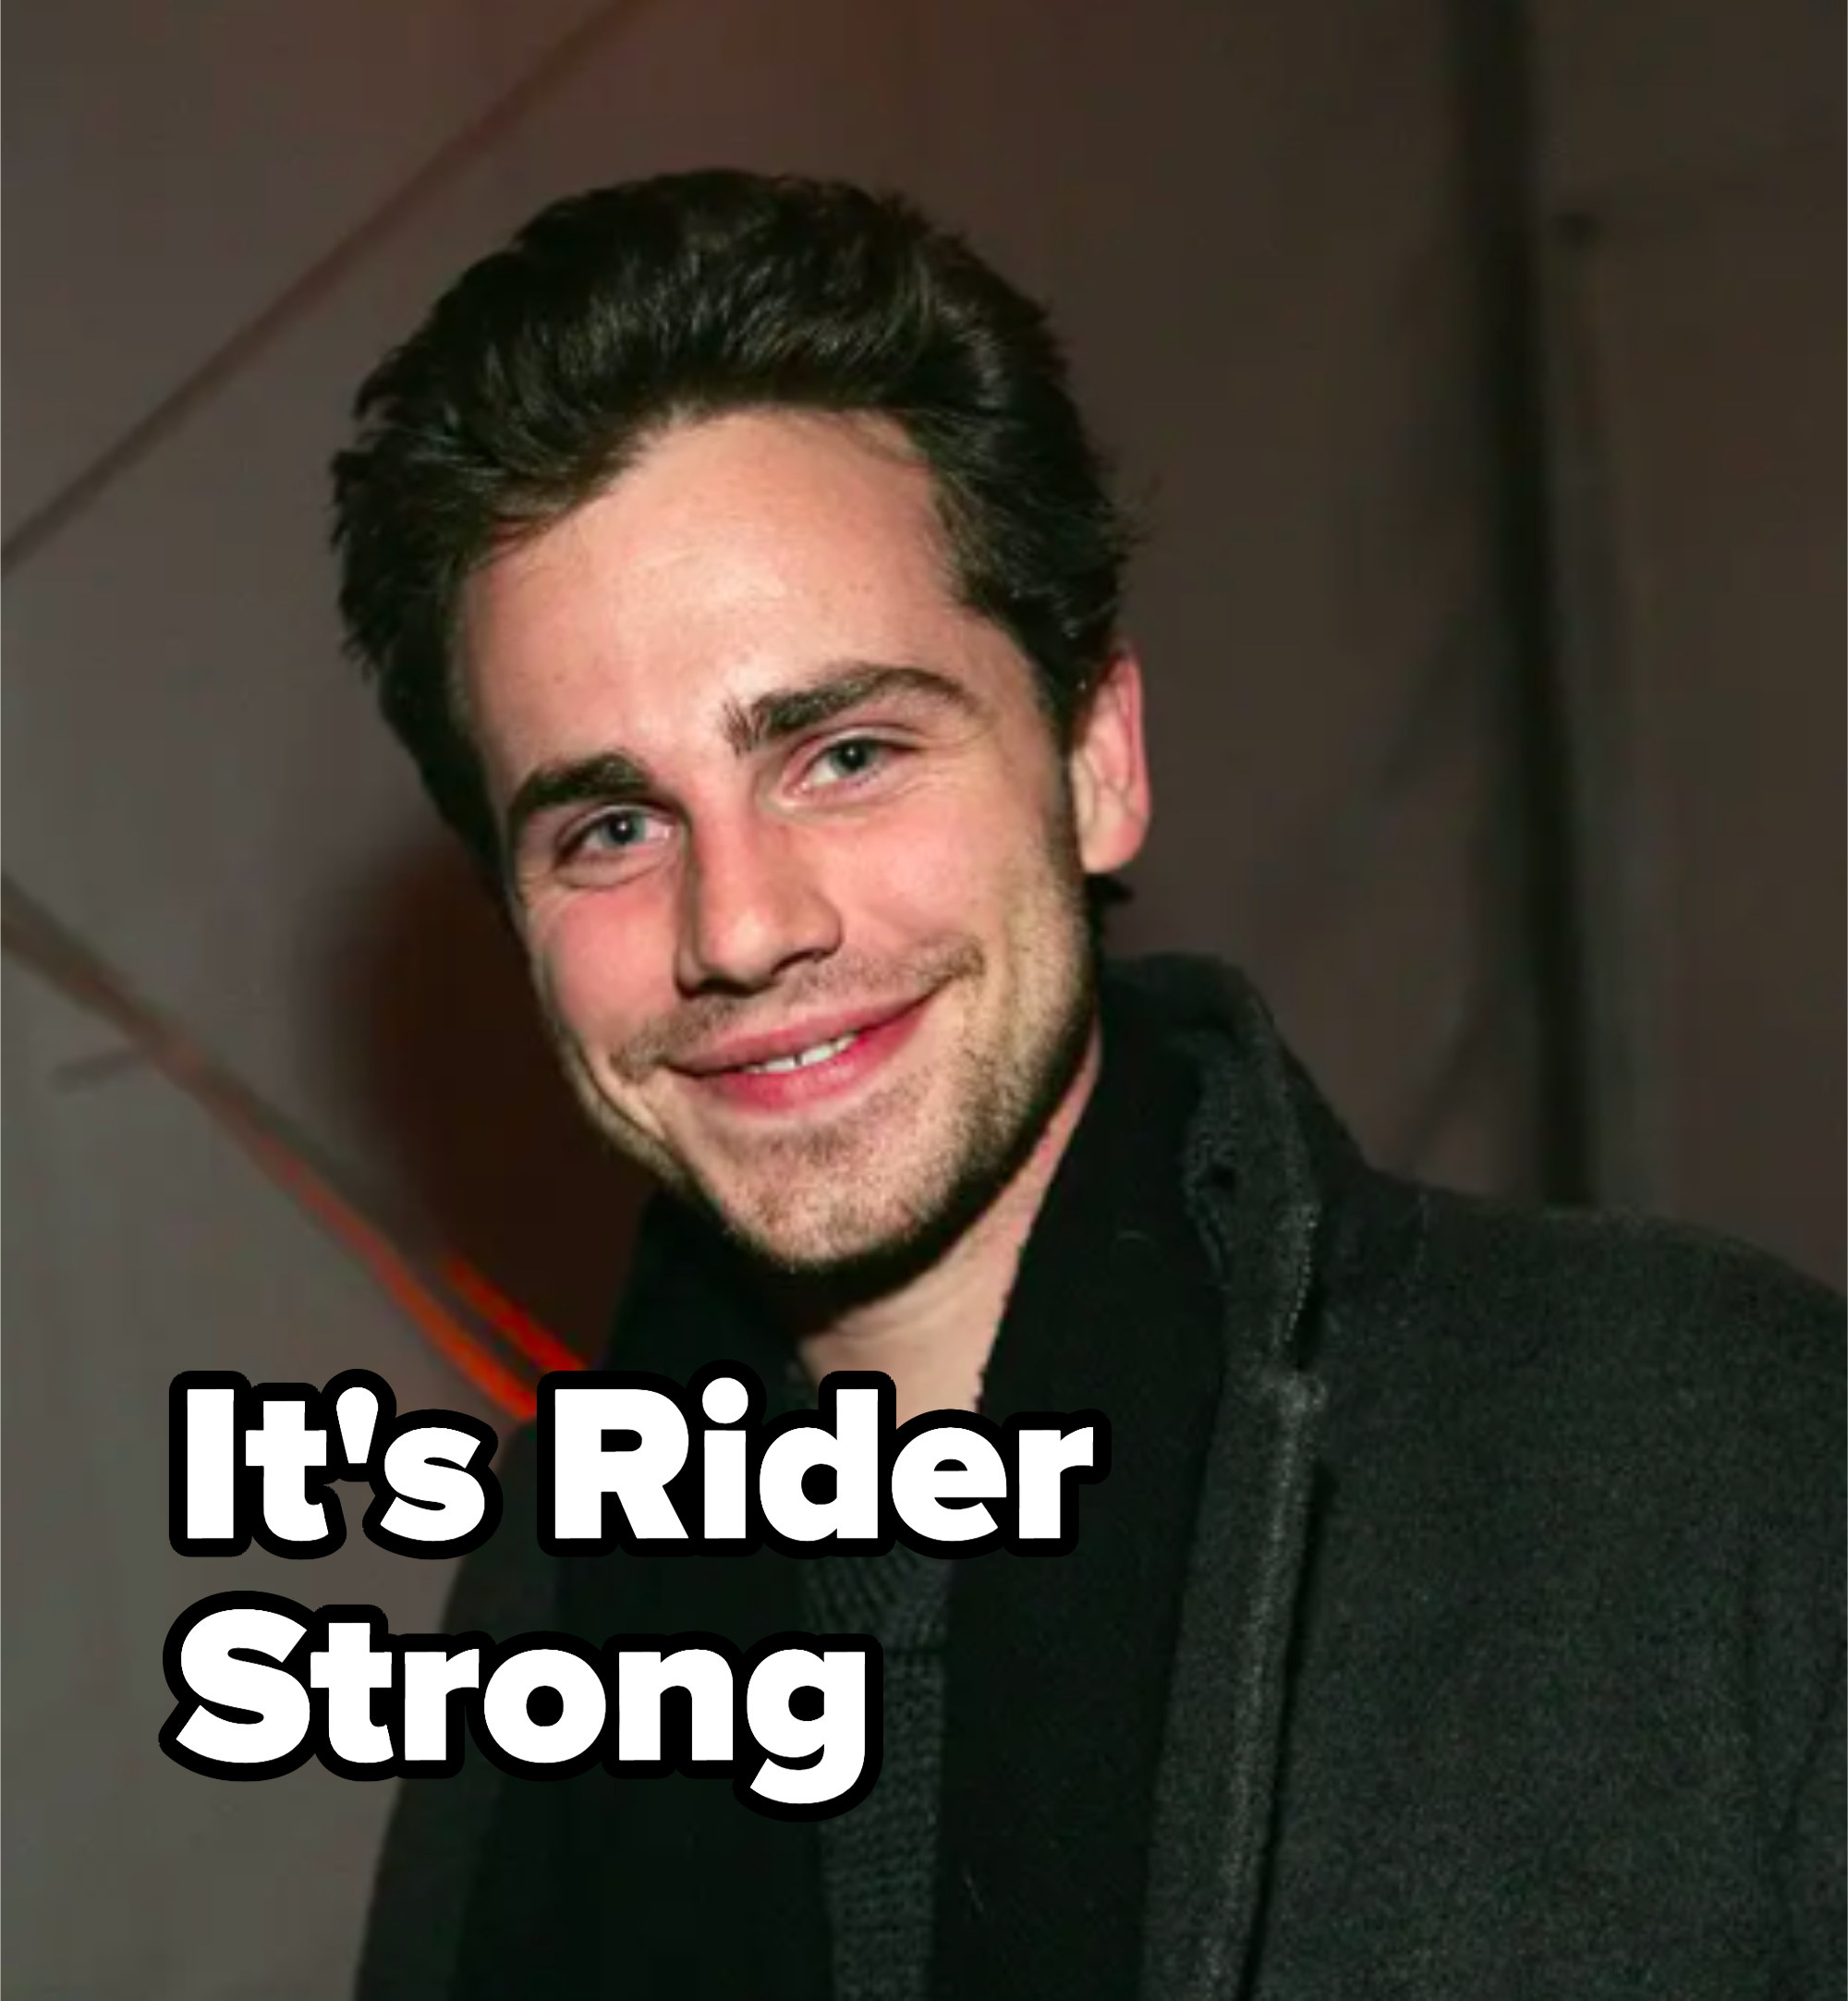 rider strong with some scruff and a big smile